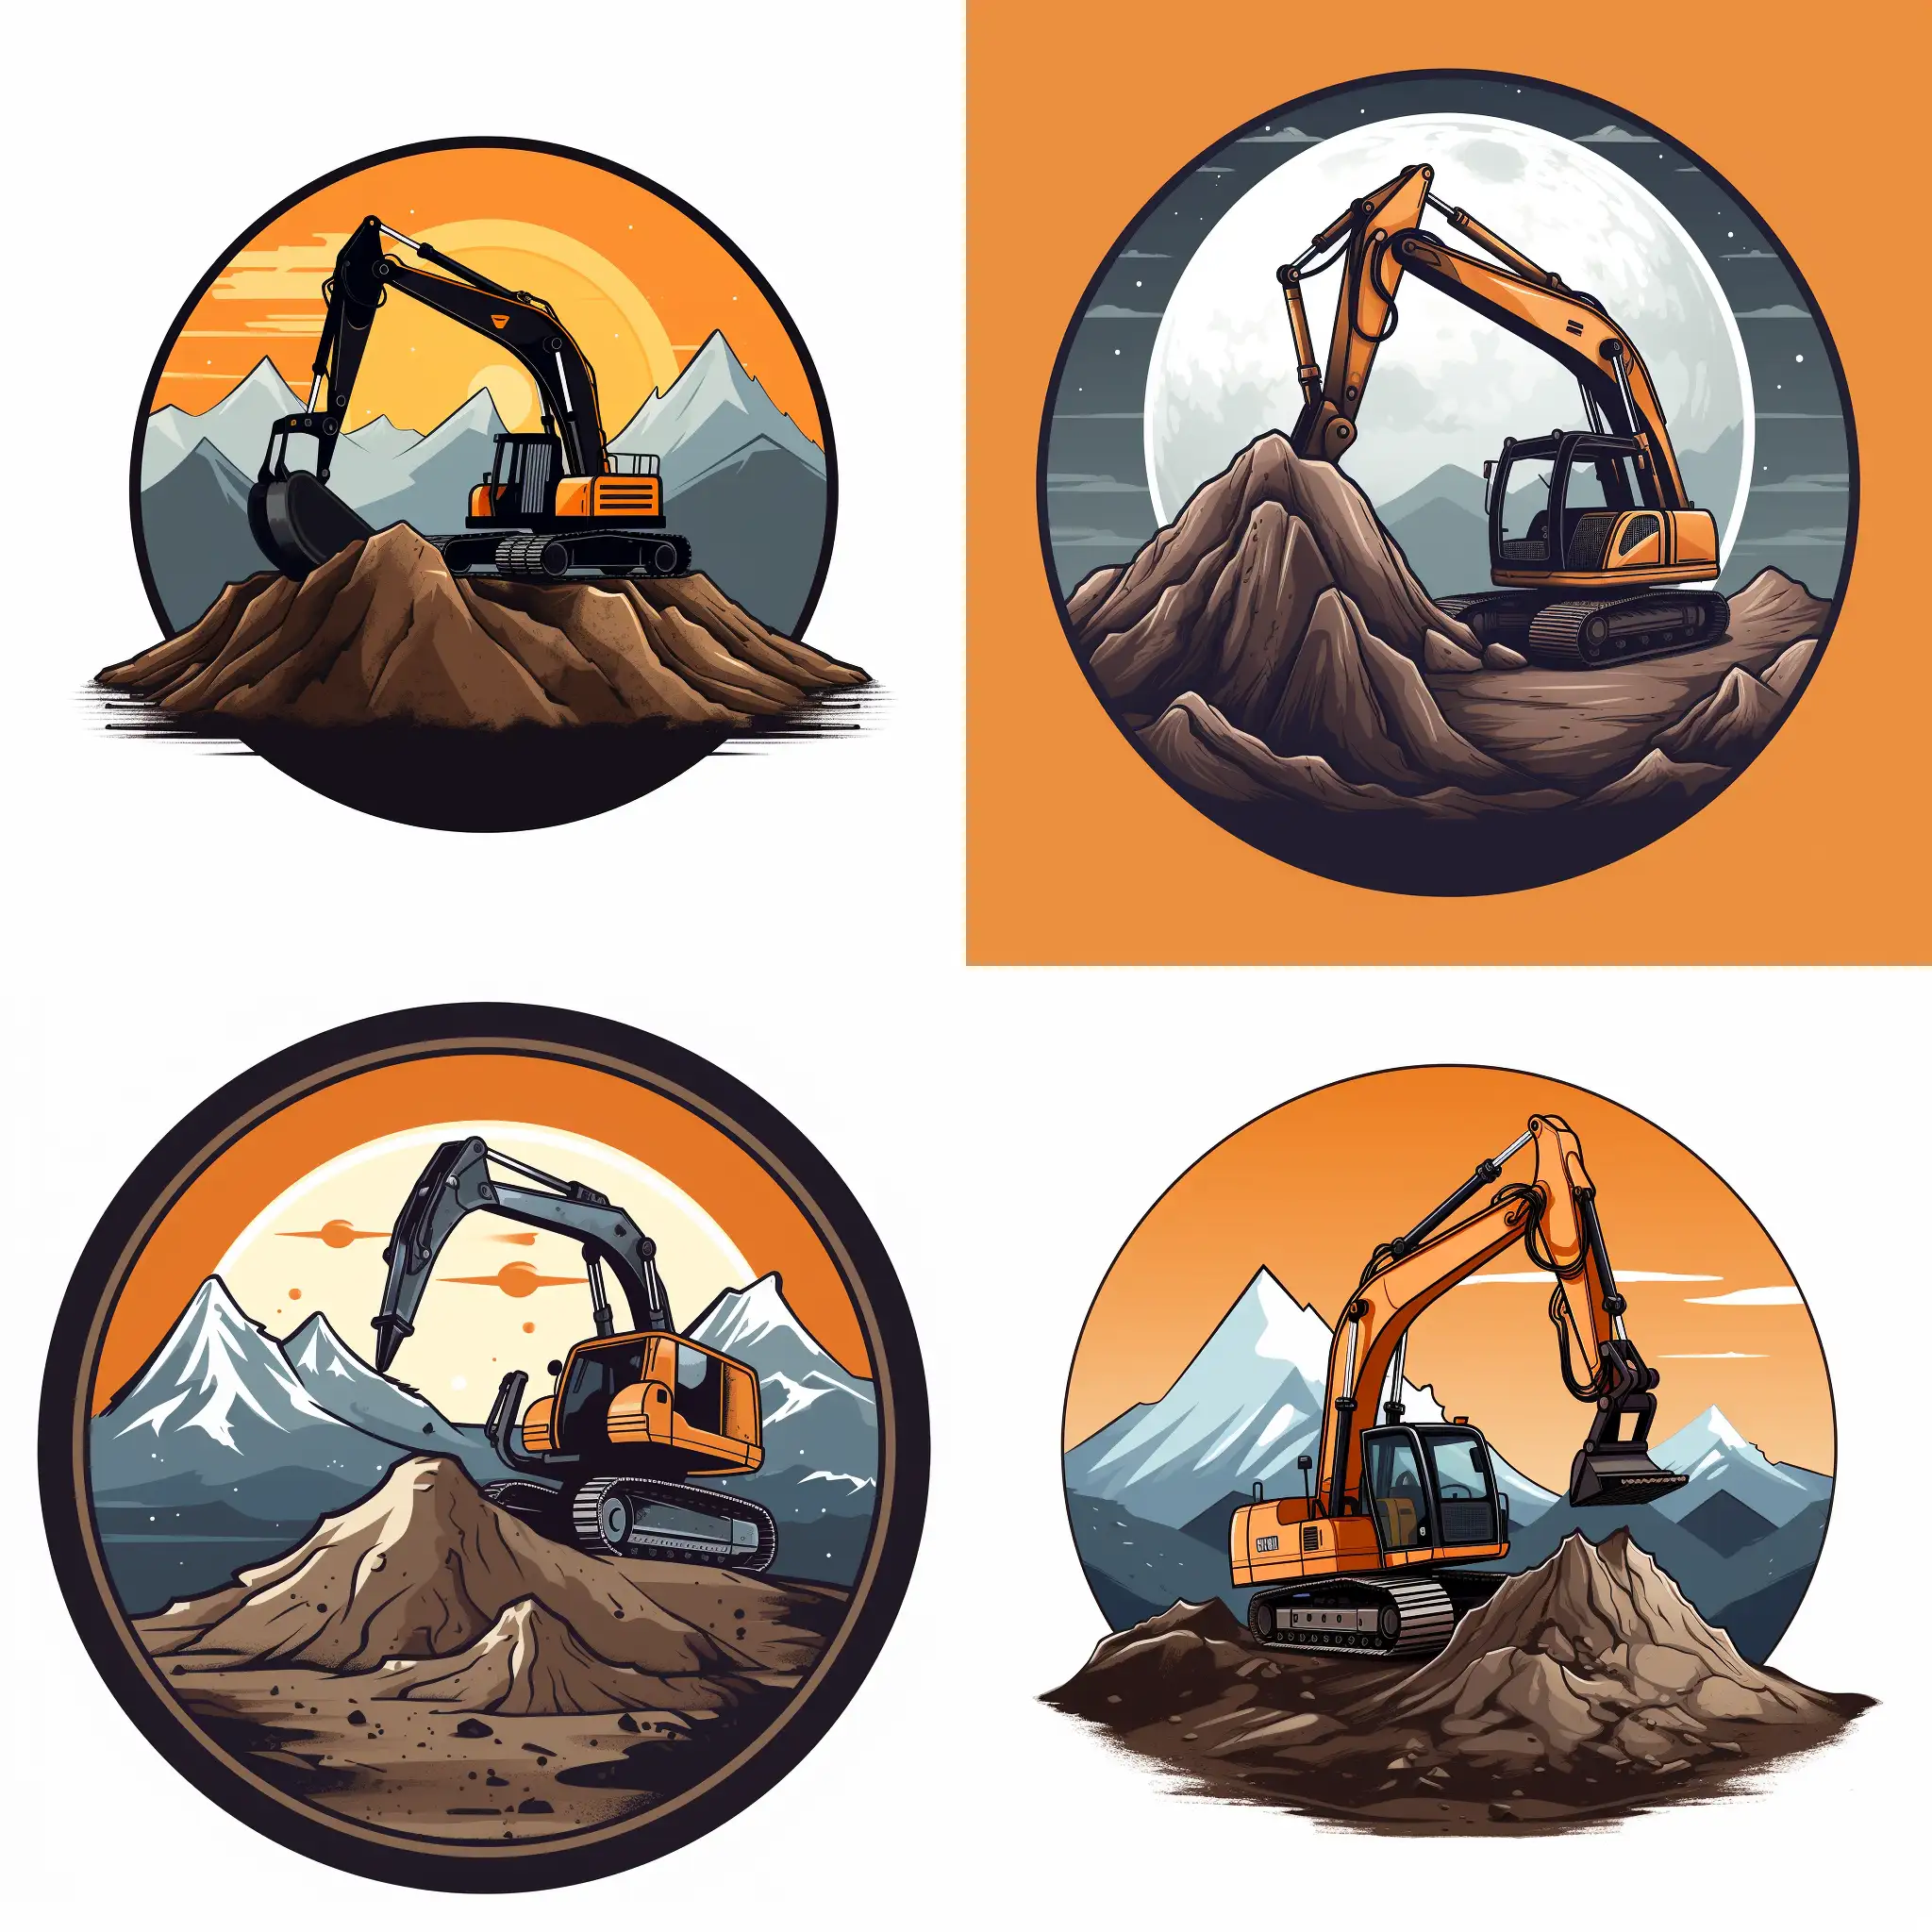 create a logo for the company Bridger McDonald Excavation, that is a orange Hitachi like excavator on a mound of dirt, spilling dirt out of the bucket onto the ground, in front of a simple grey mountain backdrop, without sky or sun in the background.
